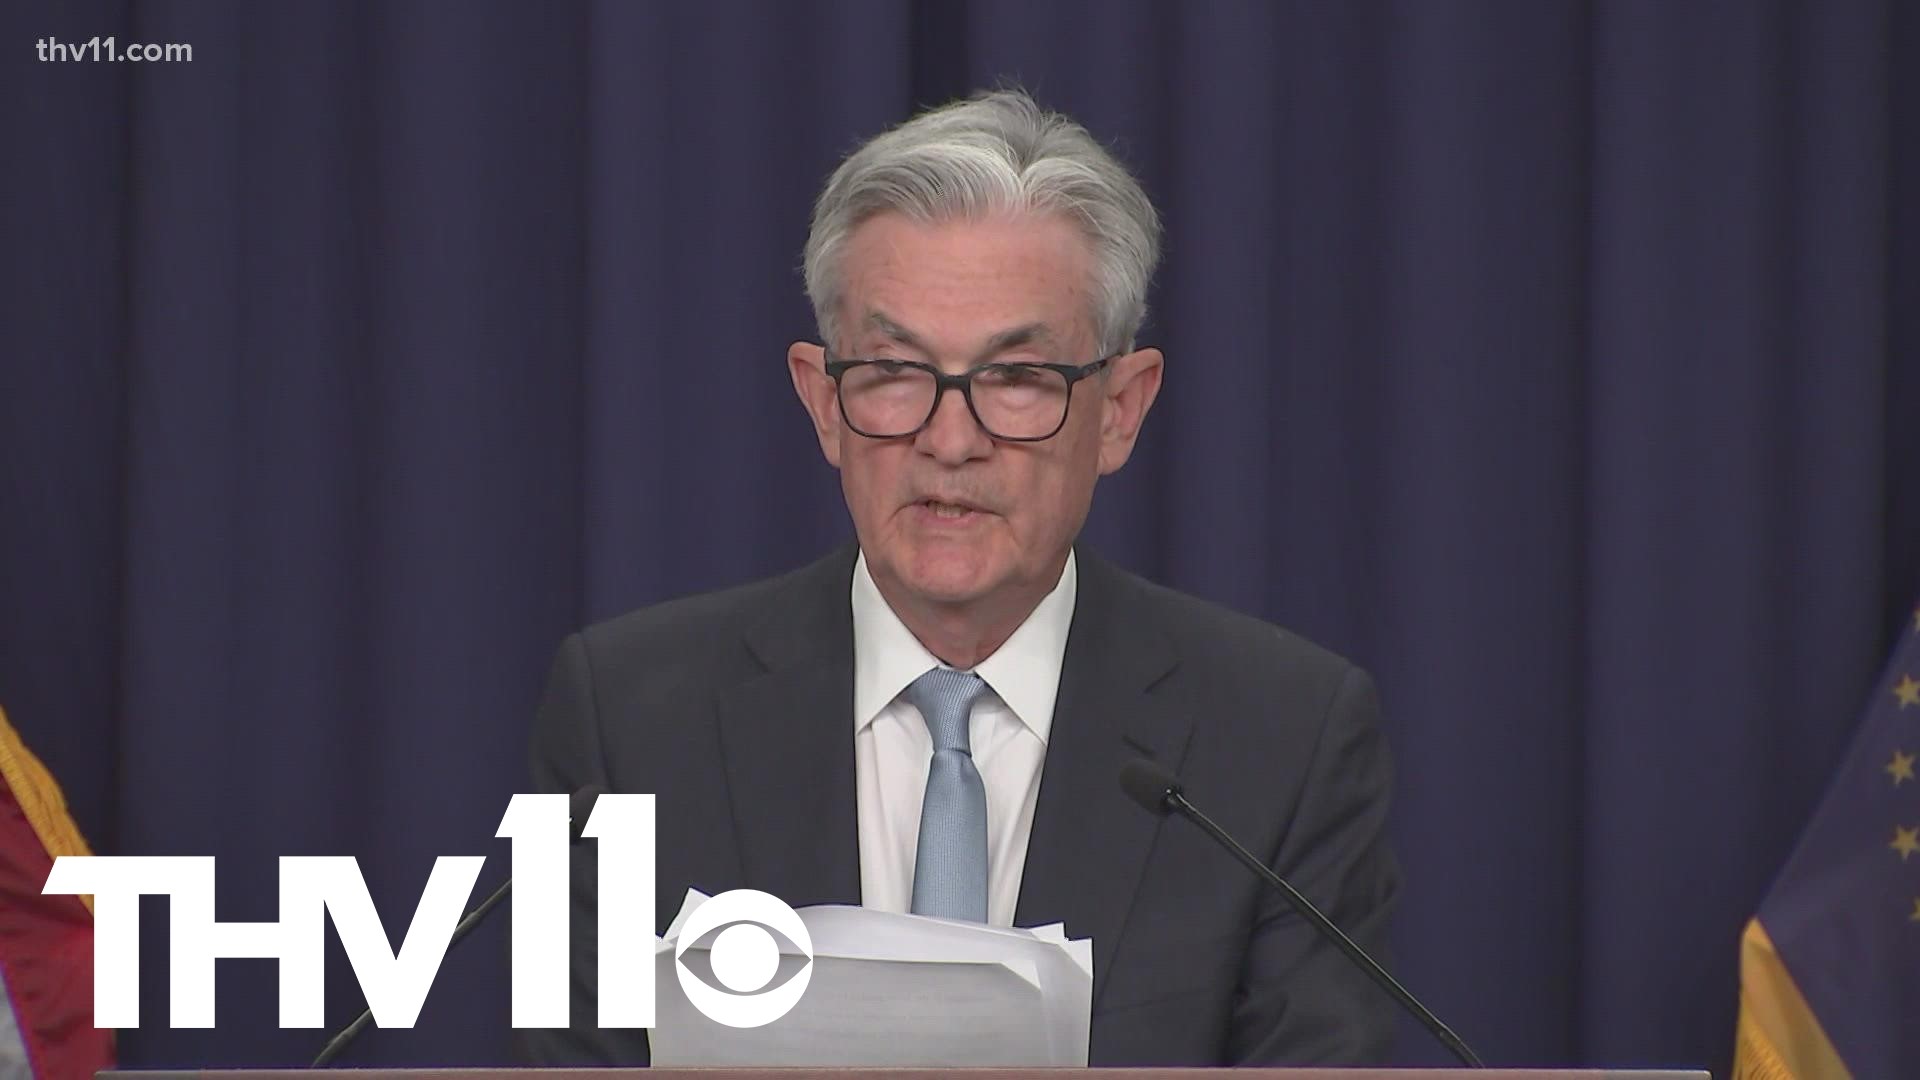 The Federal Reserve announced on Wednesday that they are raising interest rates by three quarters of a percentage point.